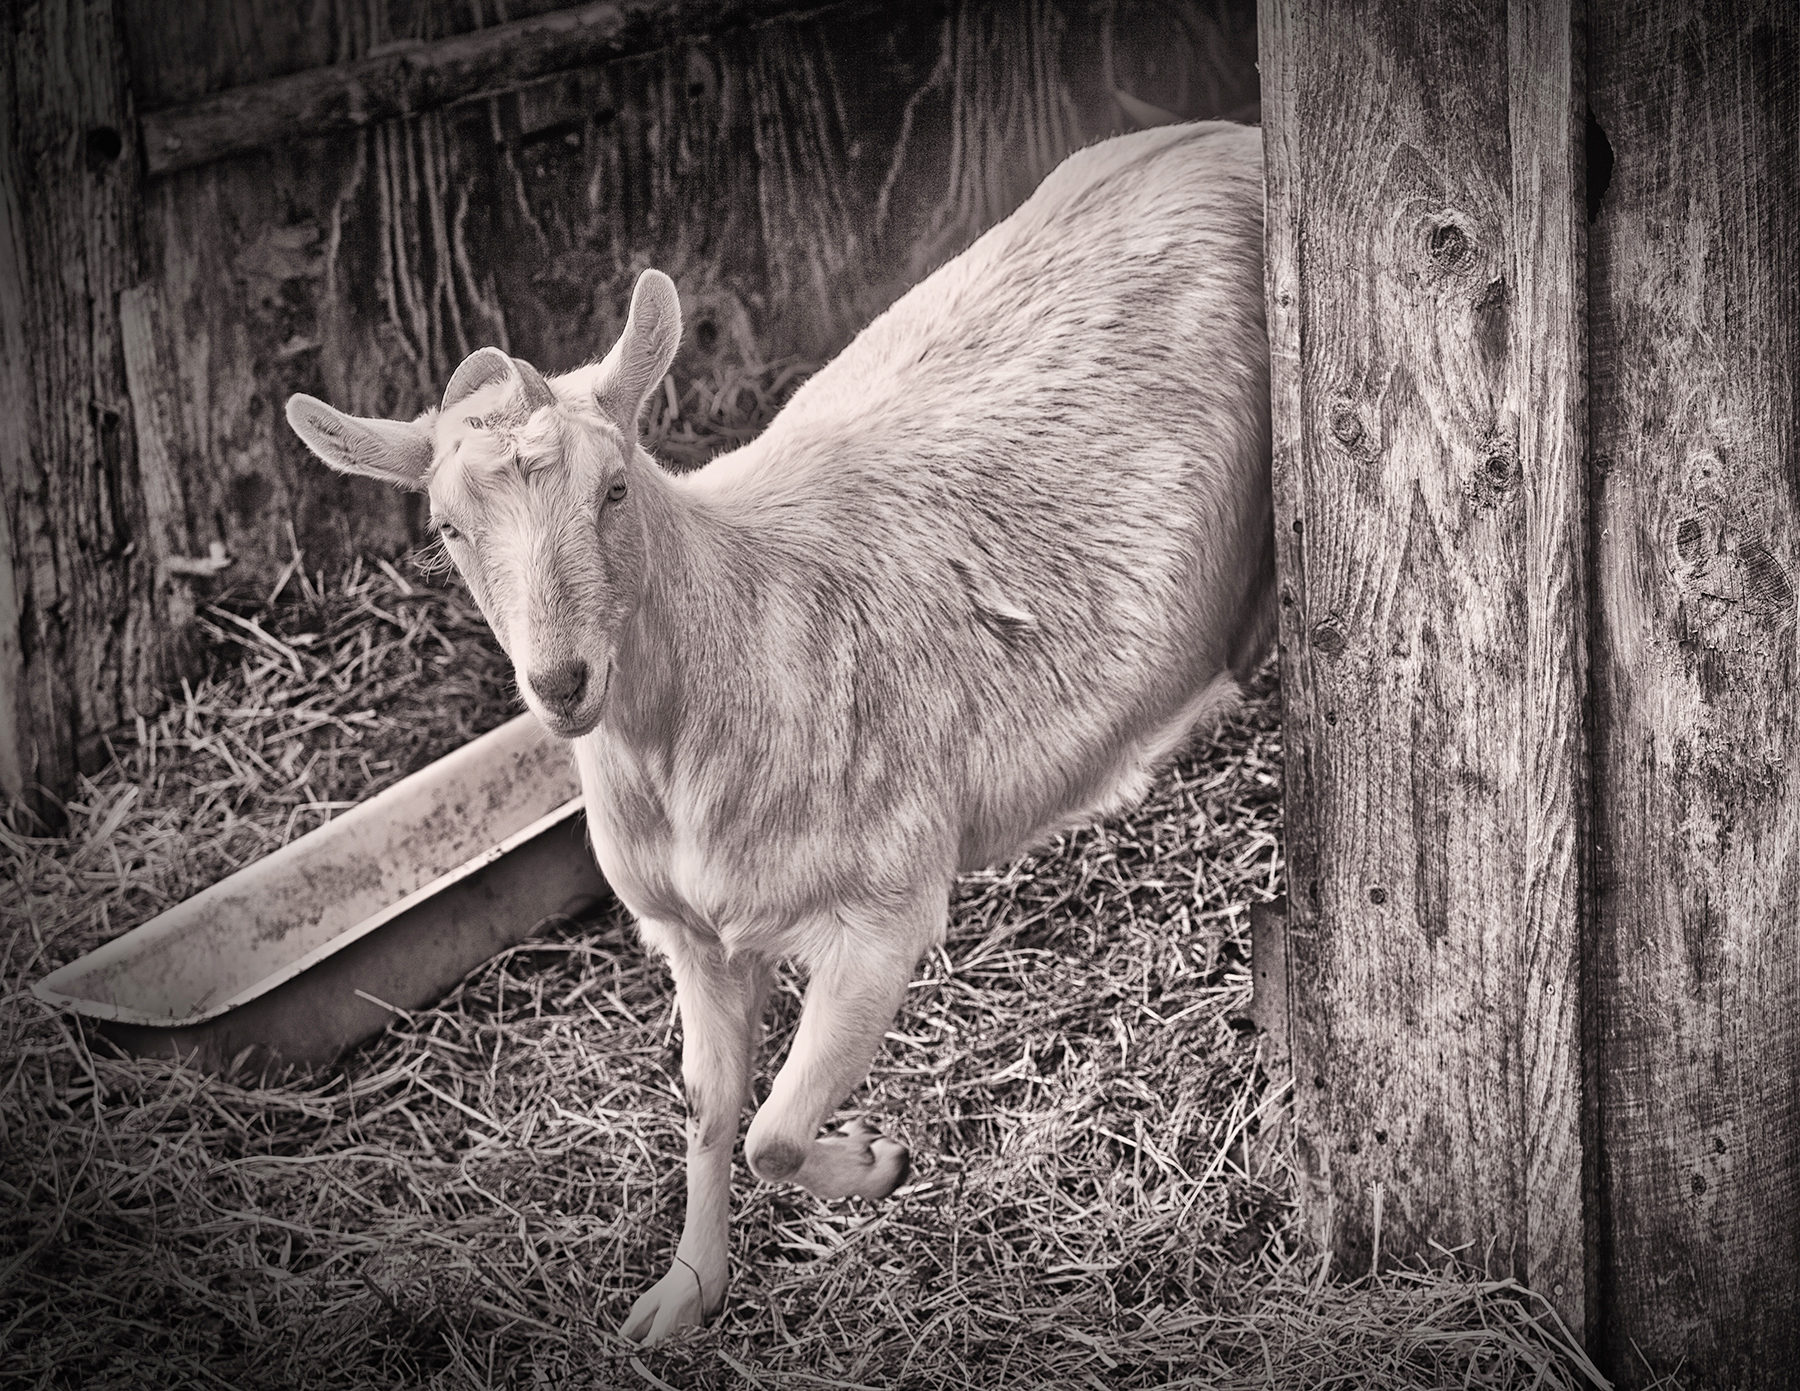 Goat at Beltane Farms